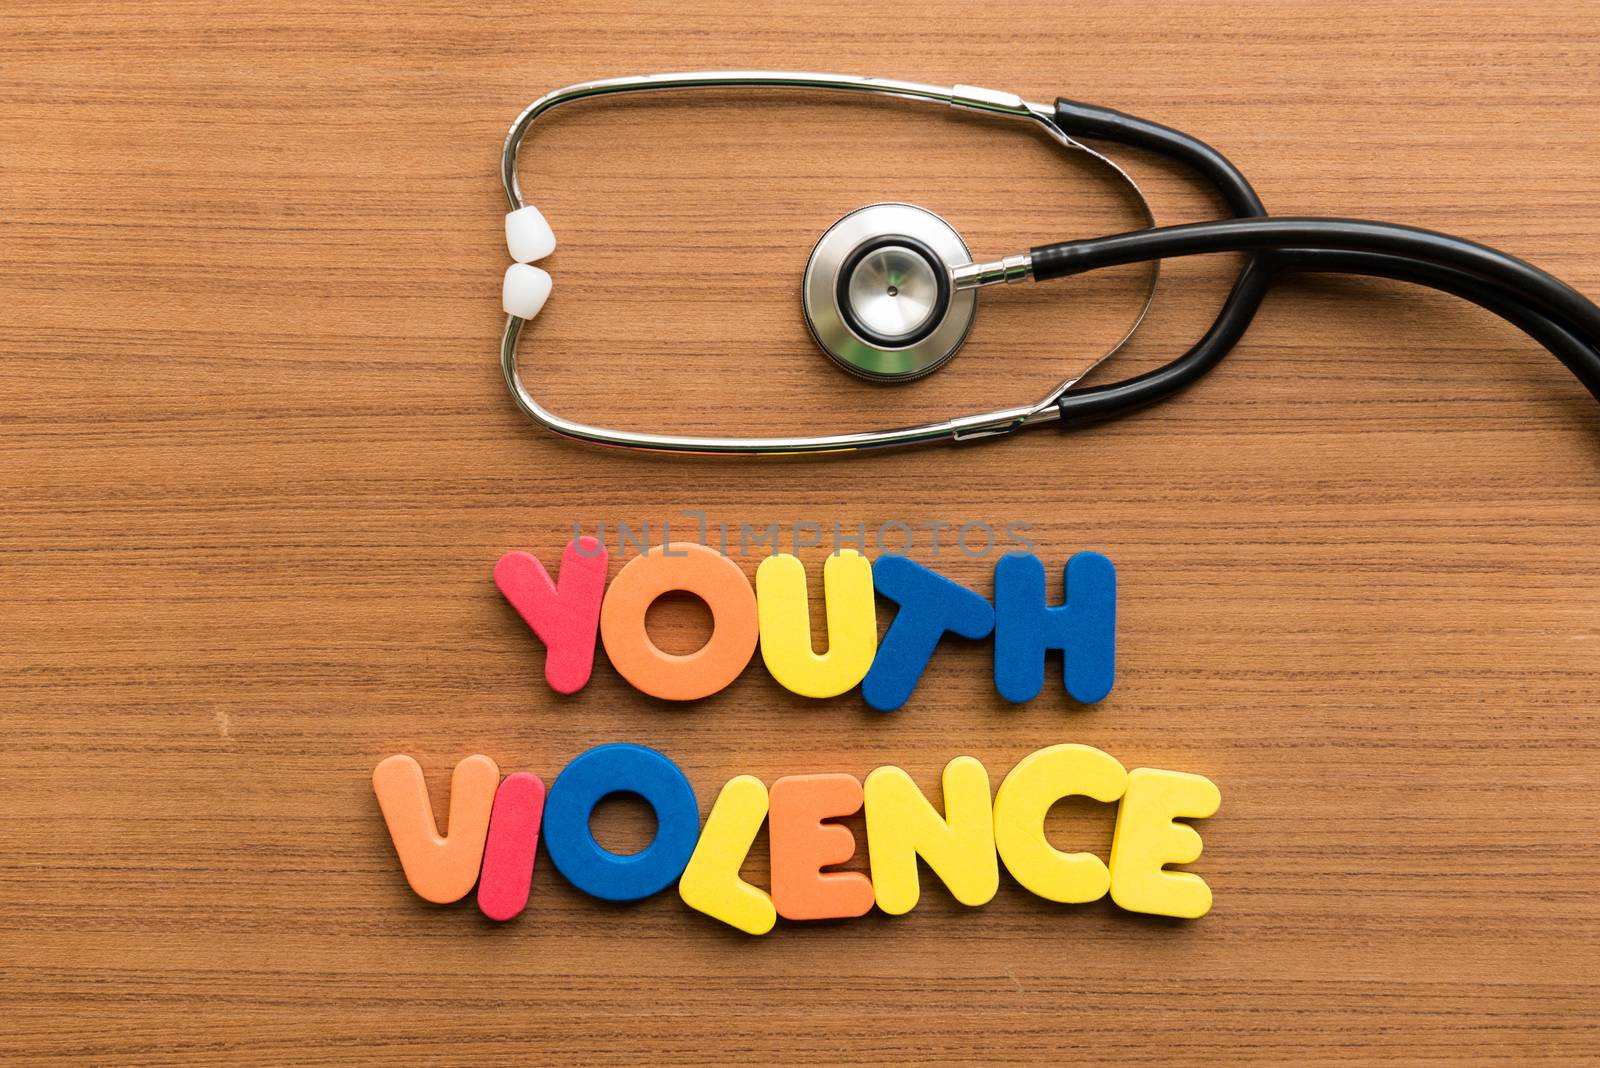 youth violence colorful word with stethoscope by sohel.parvez@hotmail.com